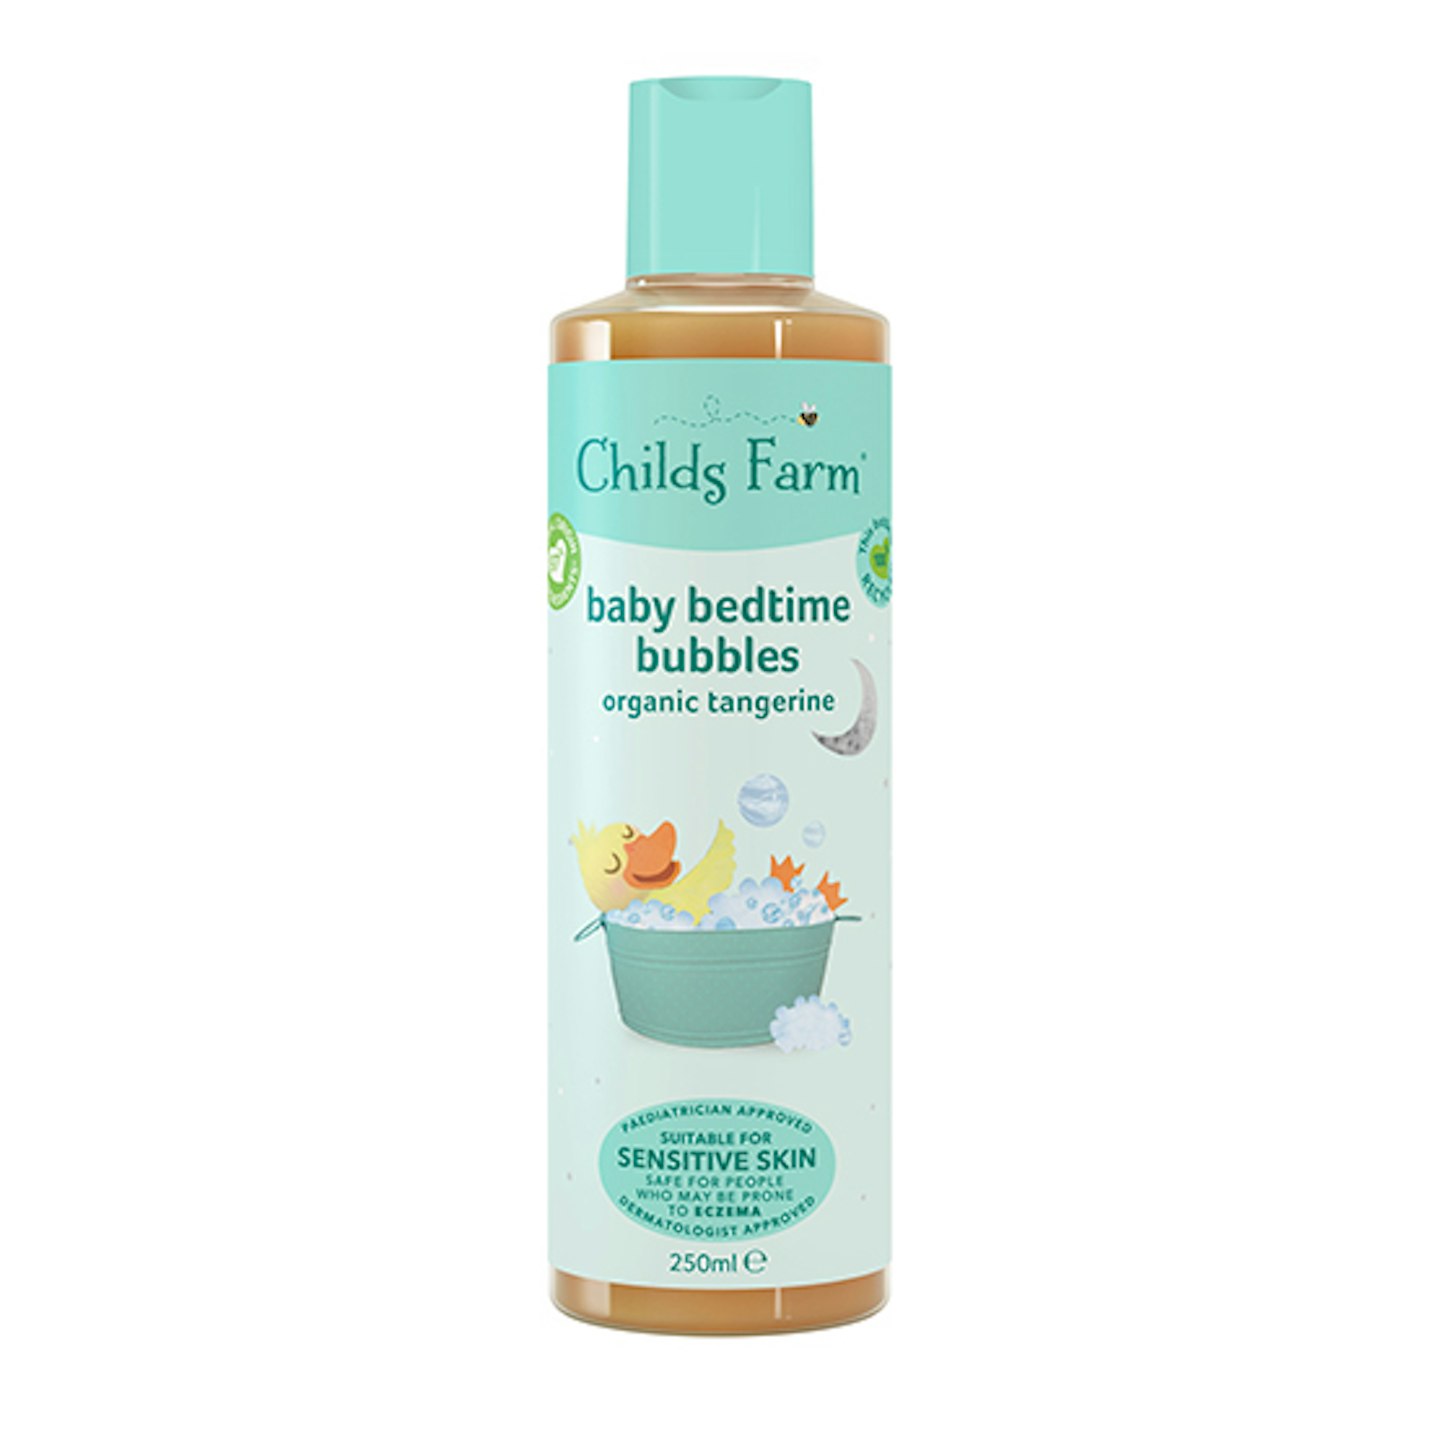 Childs Farm Baby Bedtime Bubbles Organic Tangerine product